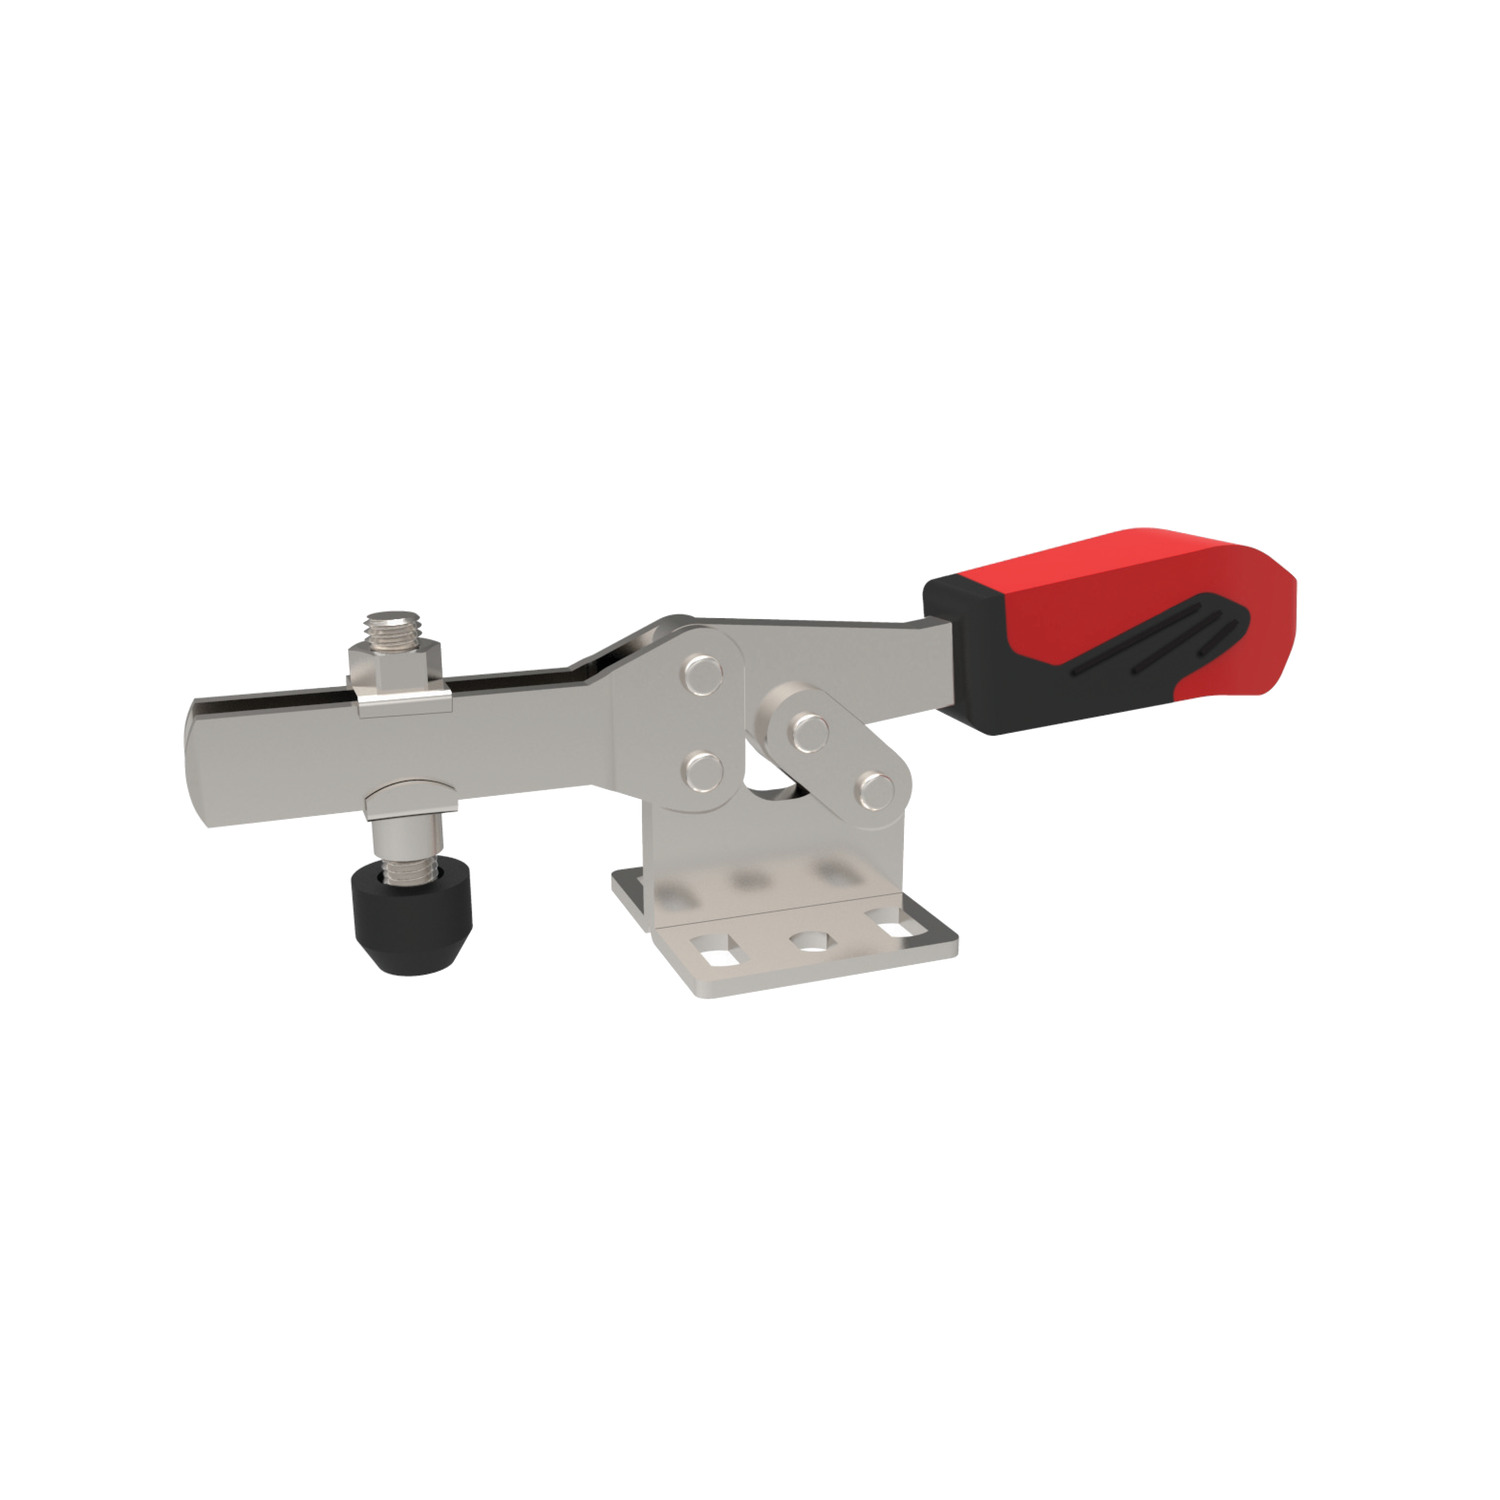 41000.4 - Horizontal Acting Toggle Clamps